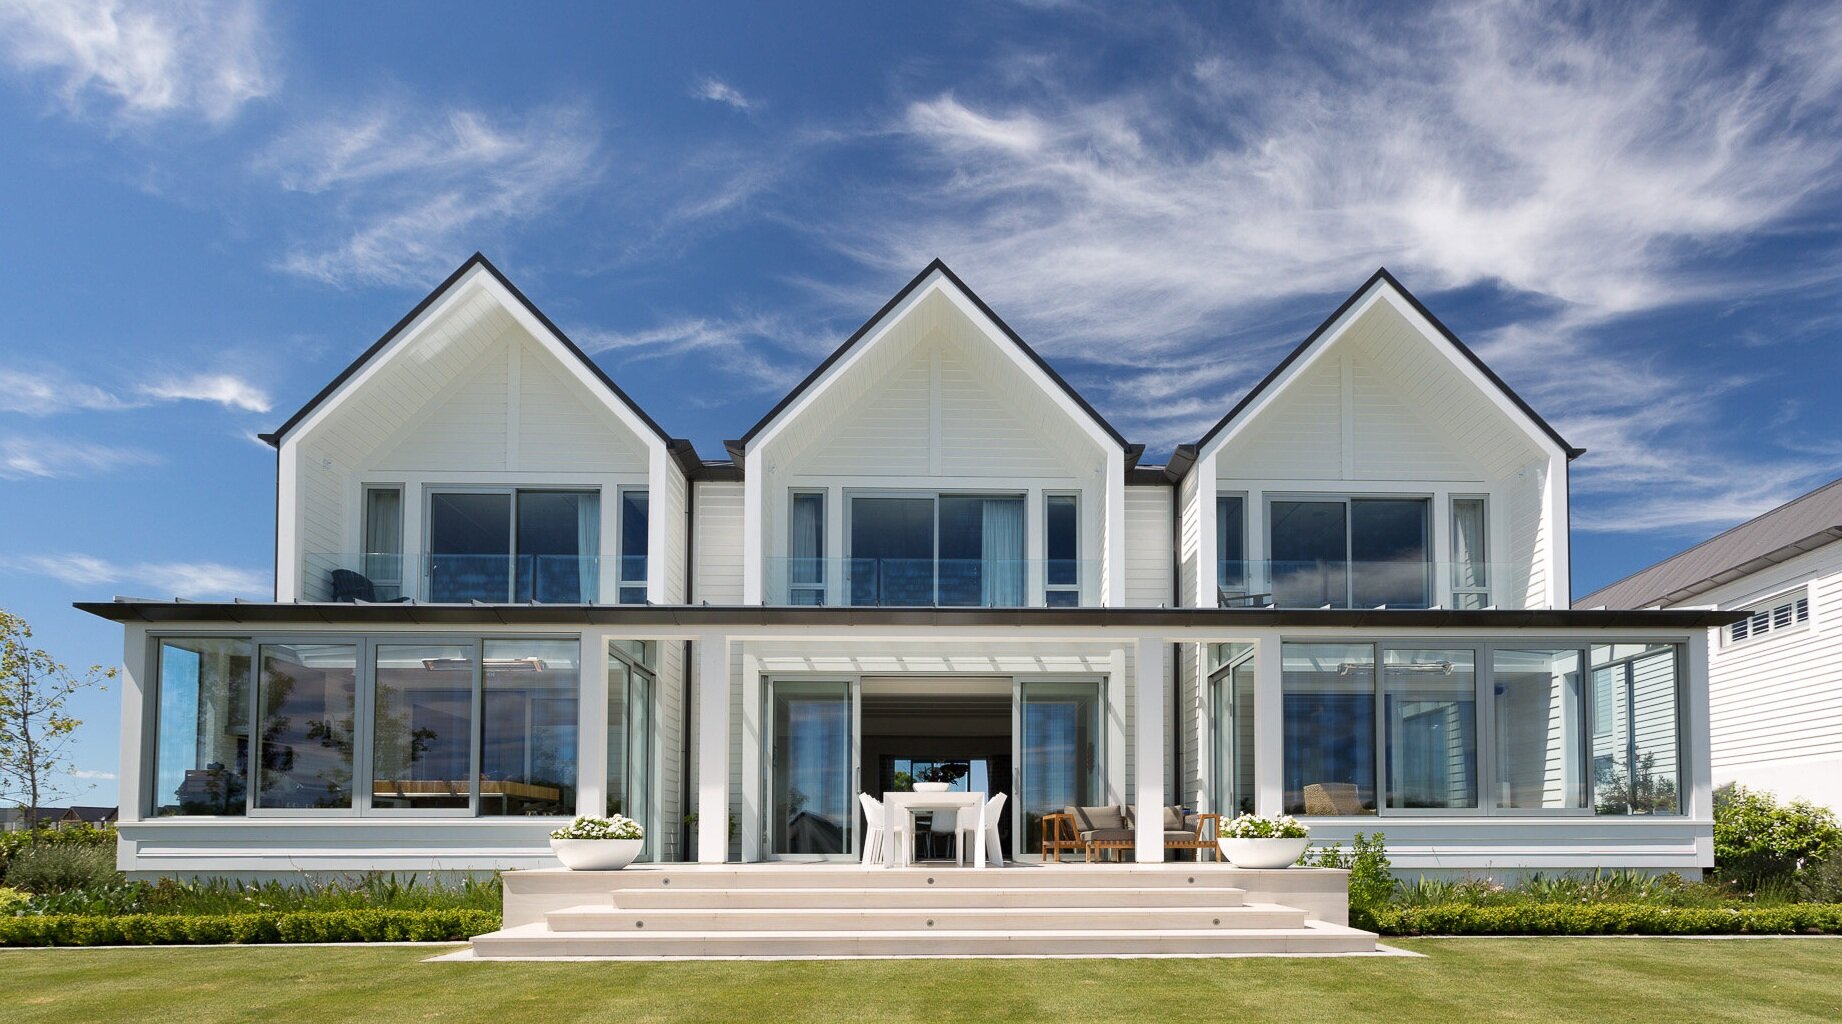 Mason%26Wales-Clearwater-House-Christchurch-Houses-Contemporary-101.jpg